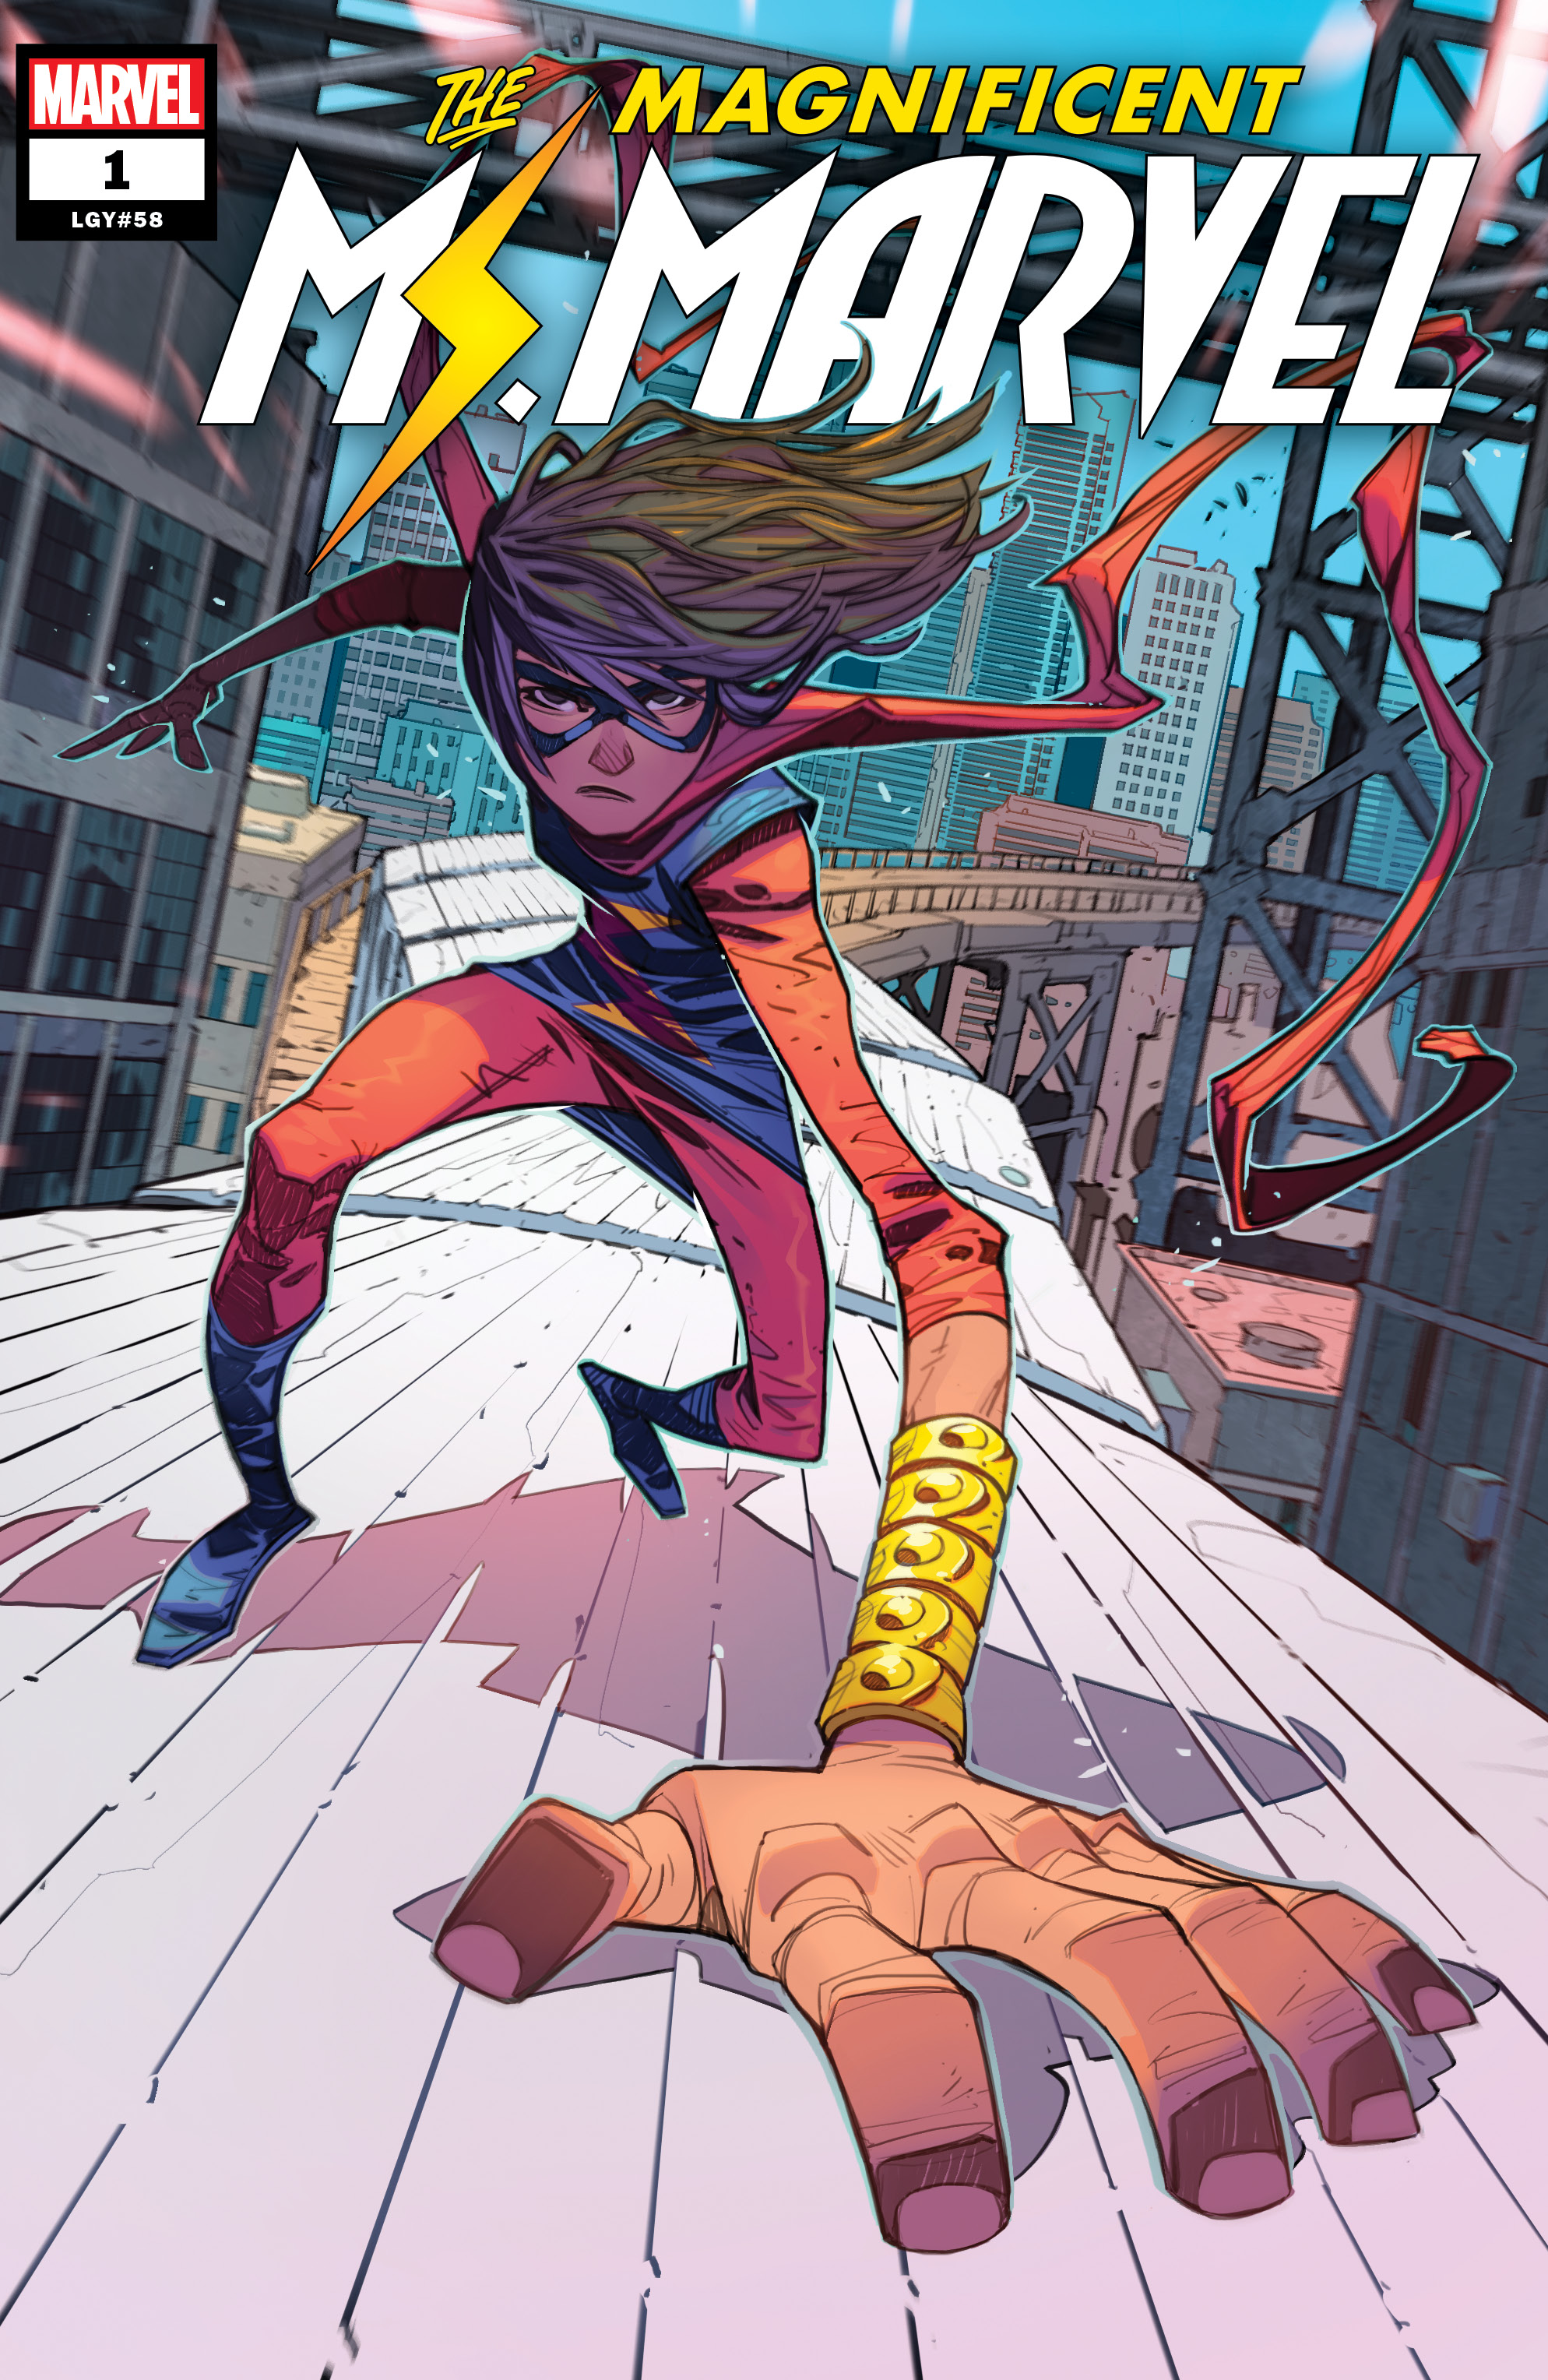 The Magnificent Ms Marvel Launches In 2019 With A New Creative Team